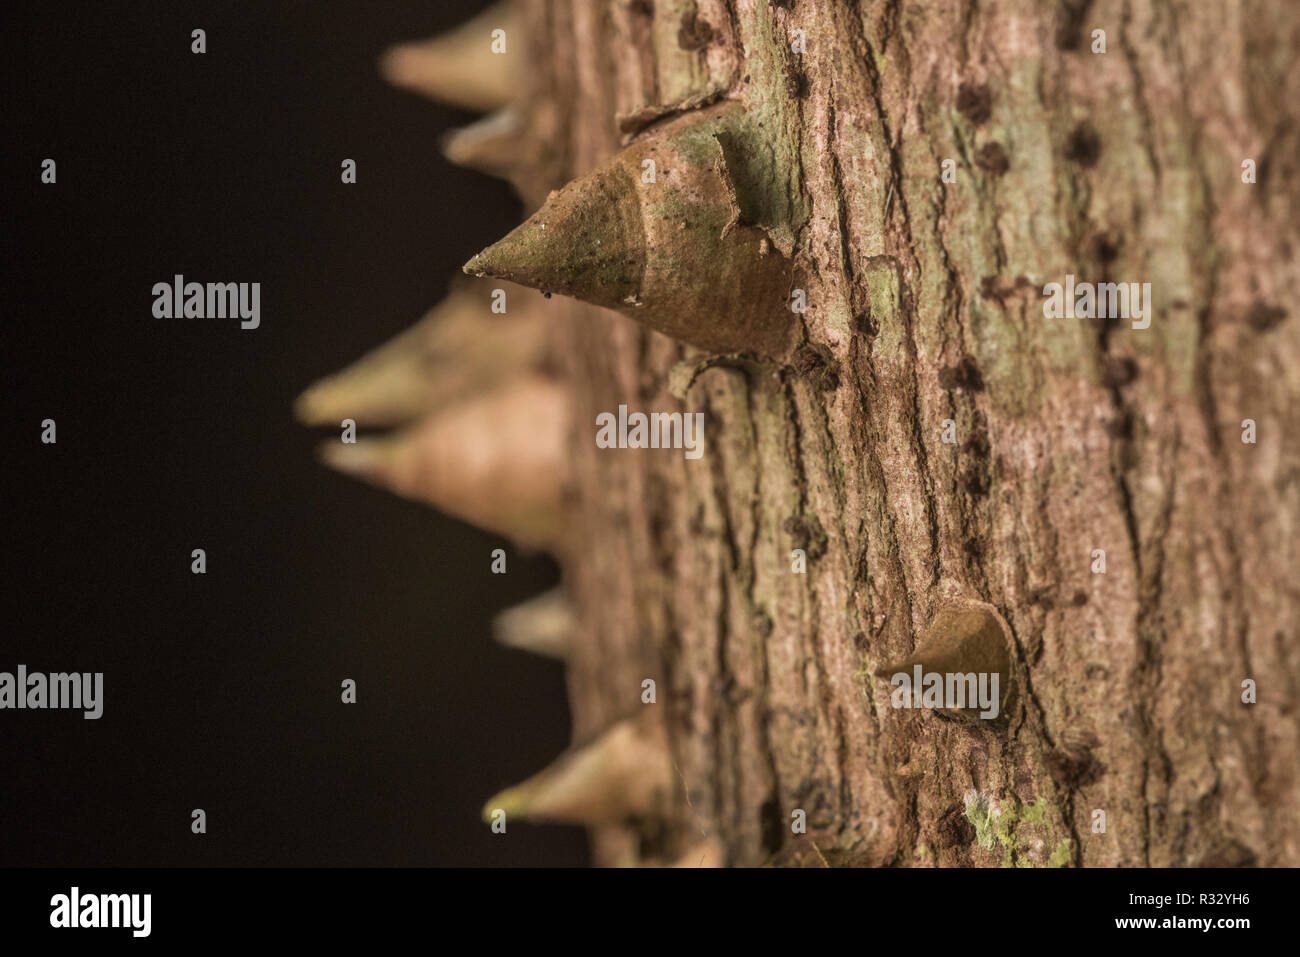 Spikes and thorns on tree bark are one defensive strategy commonly seen on neotropical trees. Stock Photo